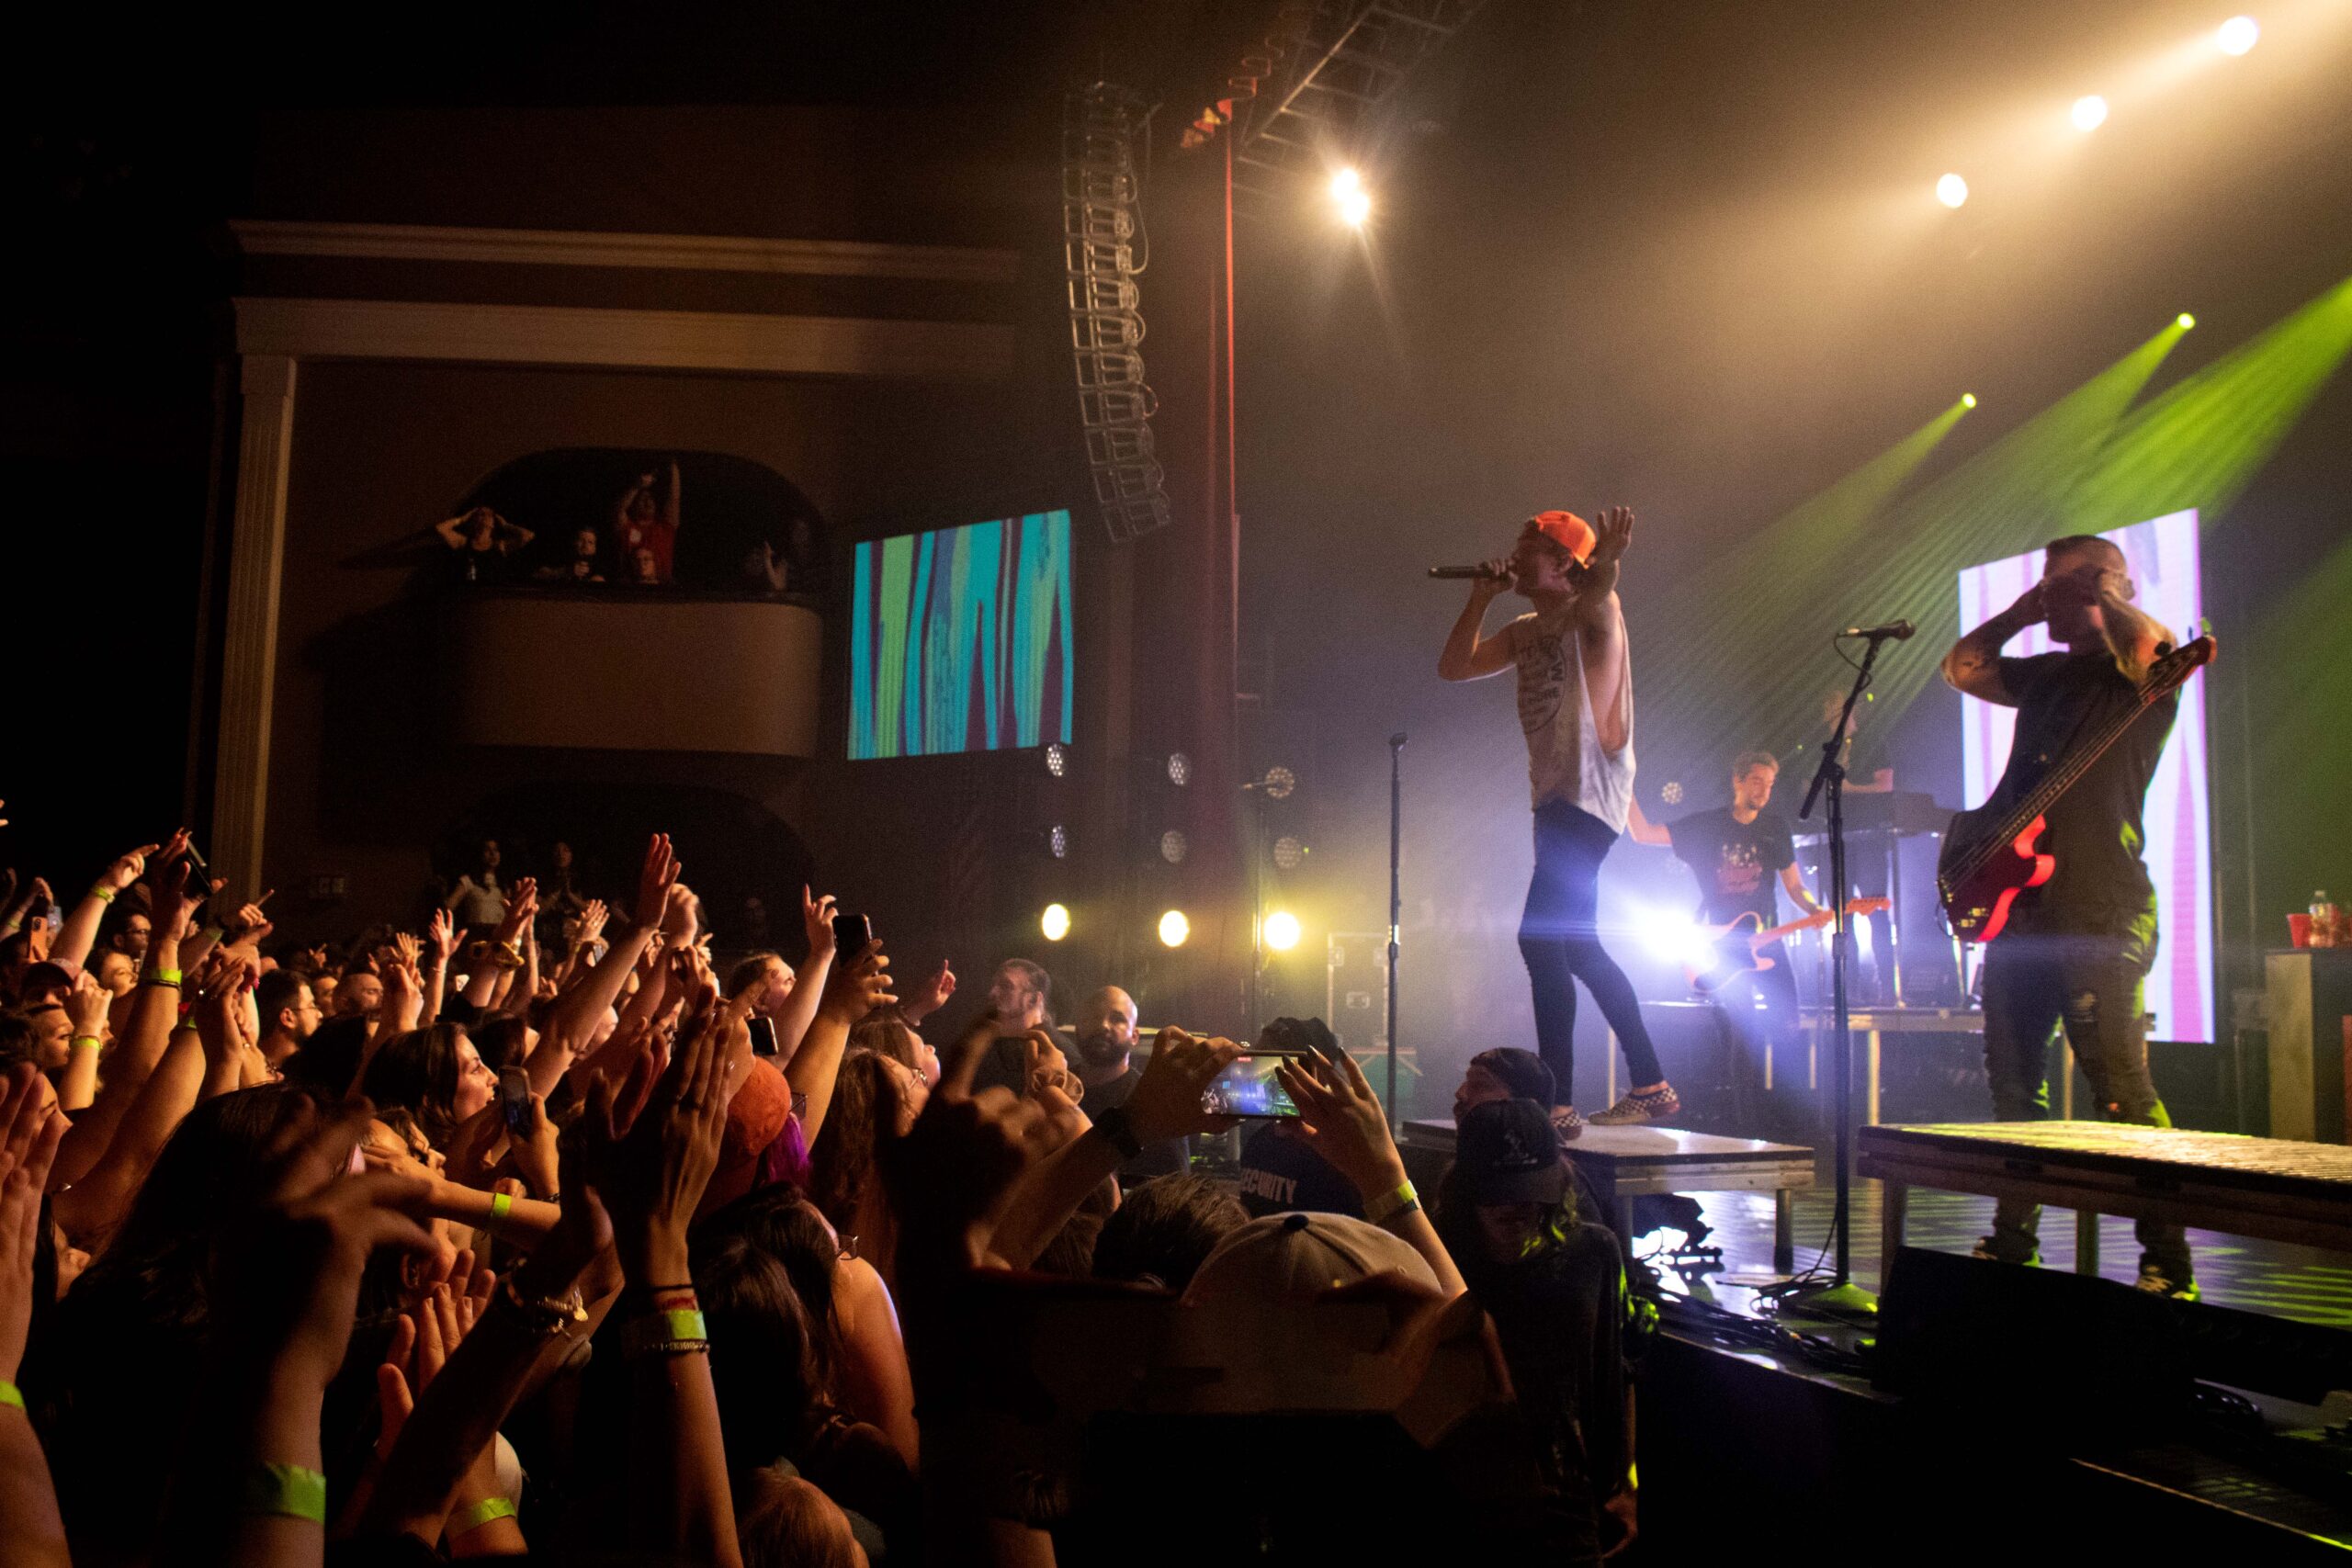 Concert review: All Time Low makes it rain with hit songs and